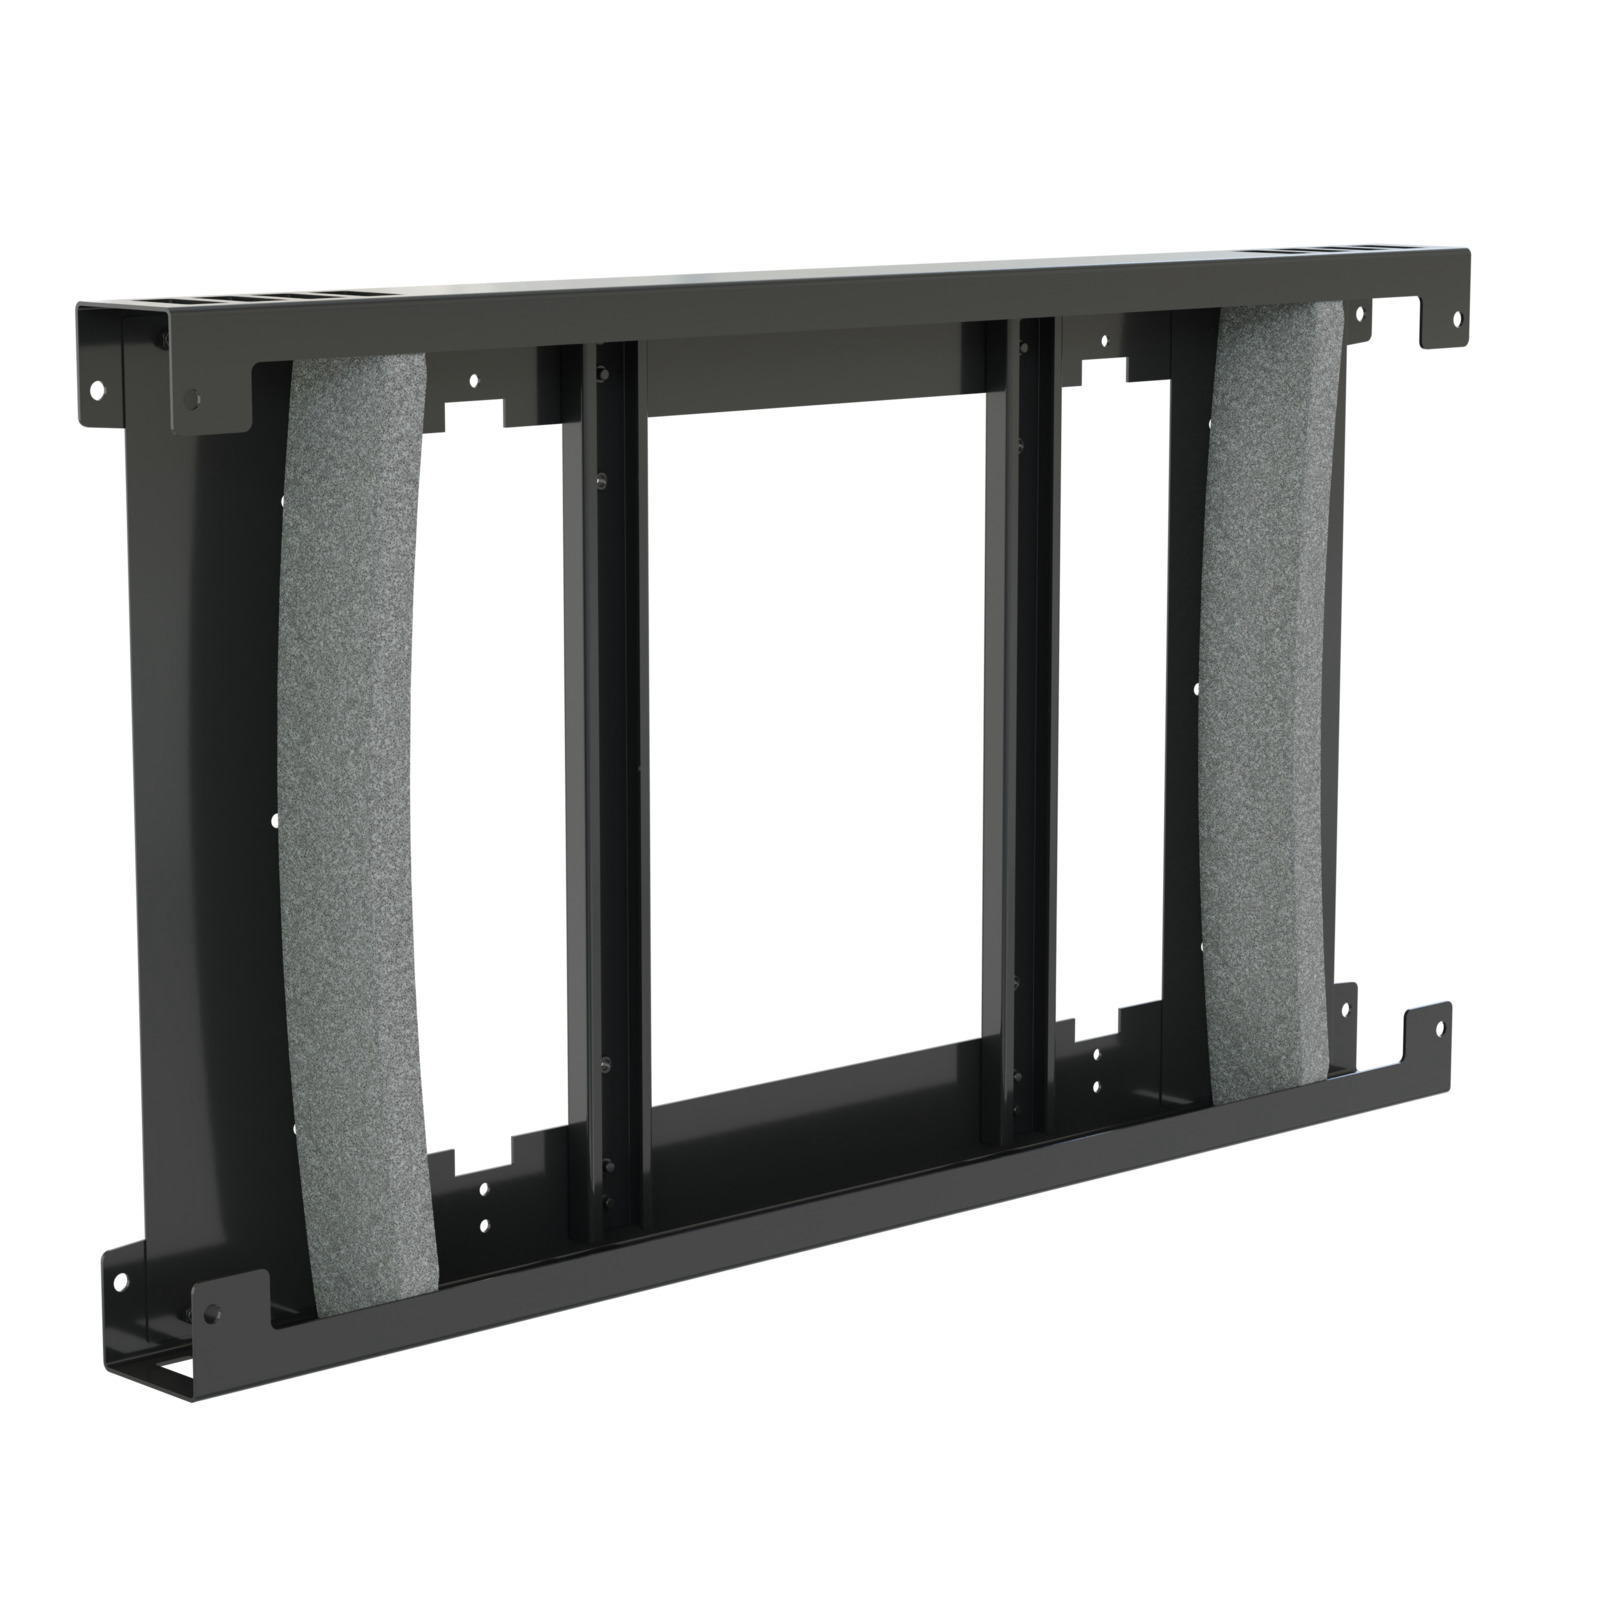 FHBO5169 Bracket for Outdoor Samsung 46” Display